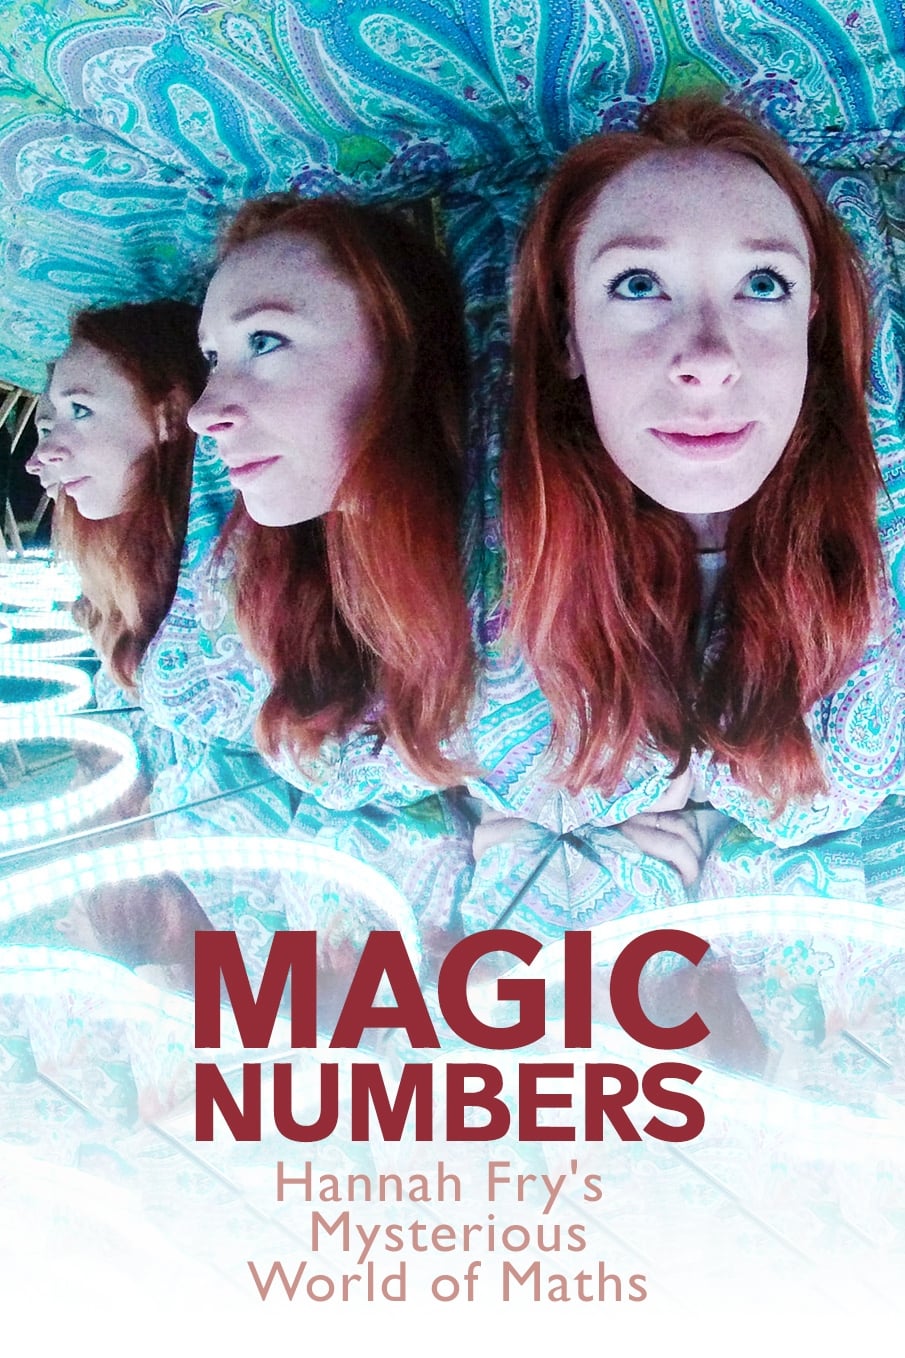 Magic Numbers: Hannah Fry's Mysterious World of Maths (2018)